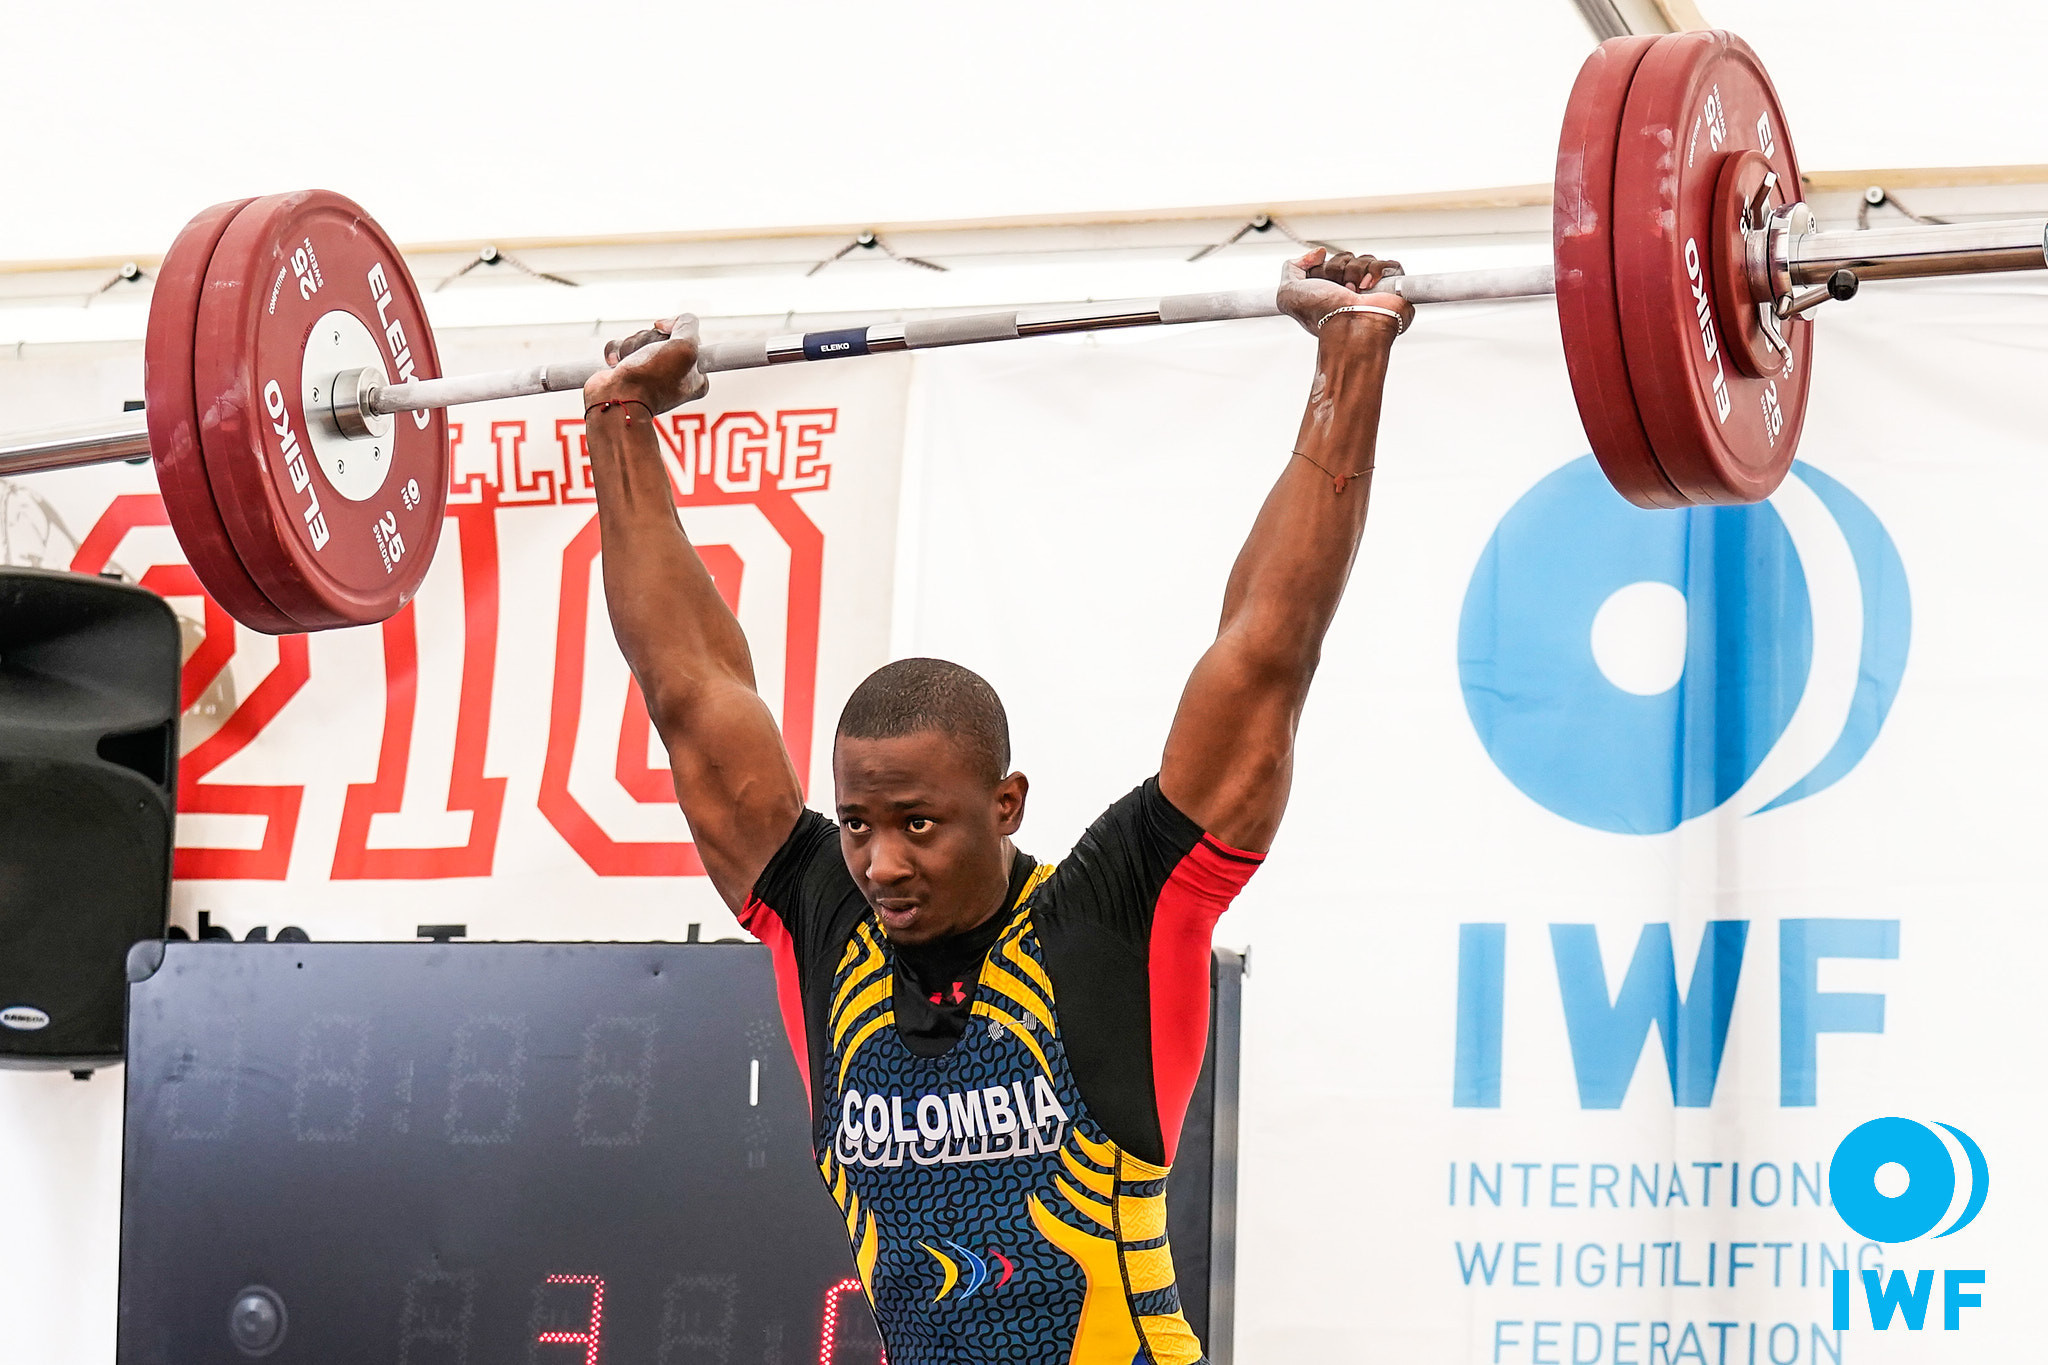 Street weightlifting takes the sport to urban settings ©IWF